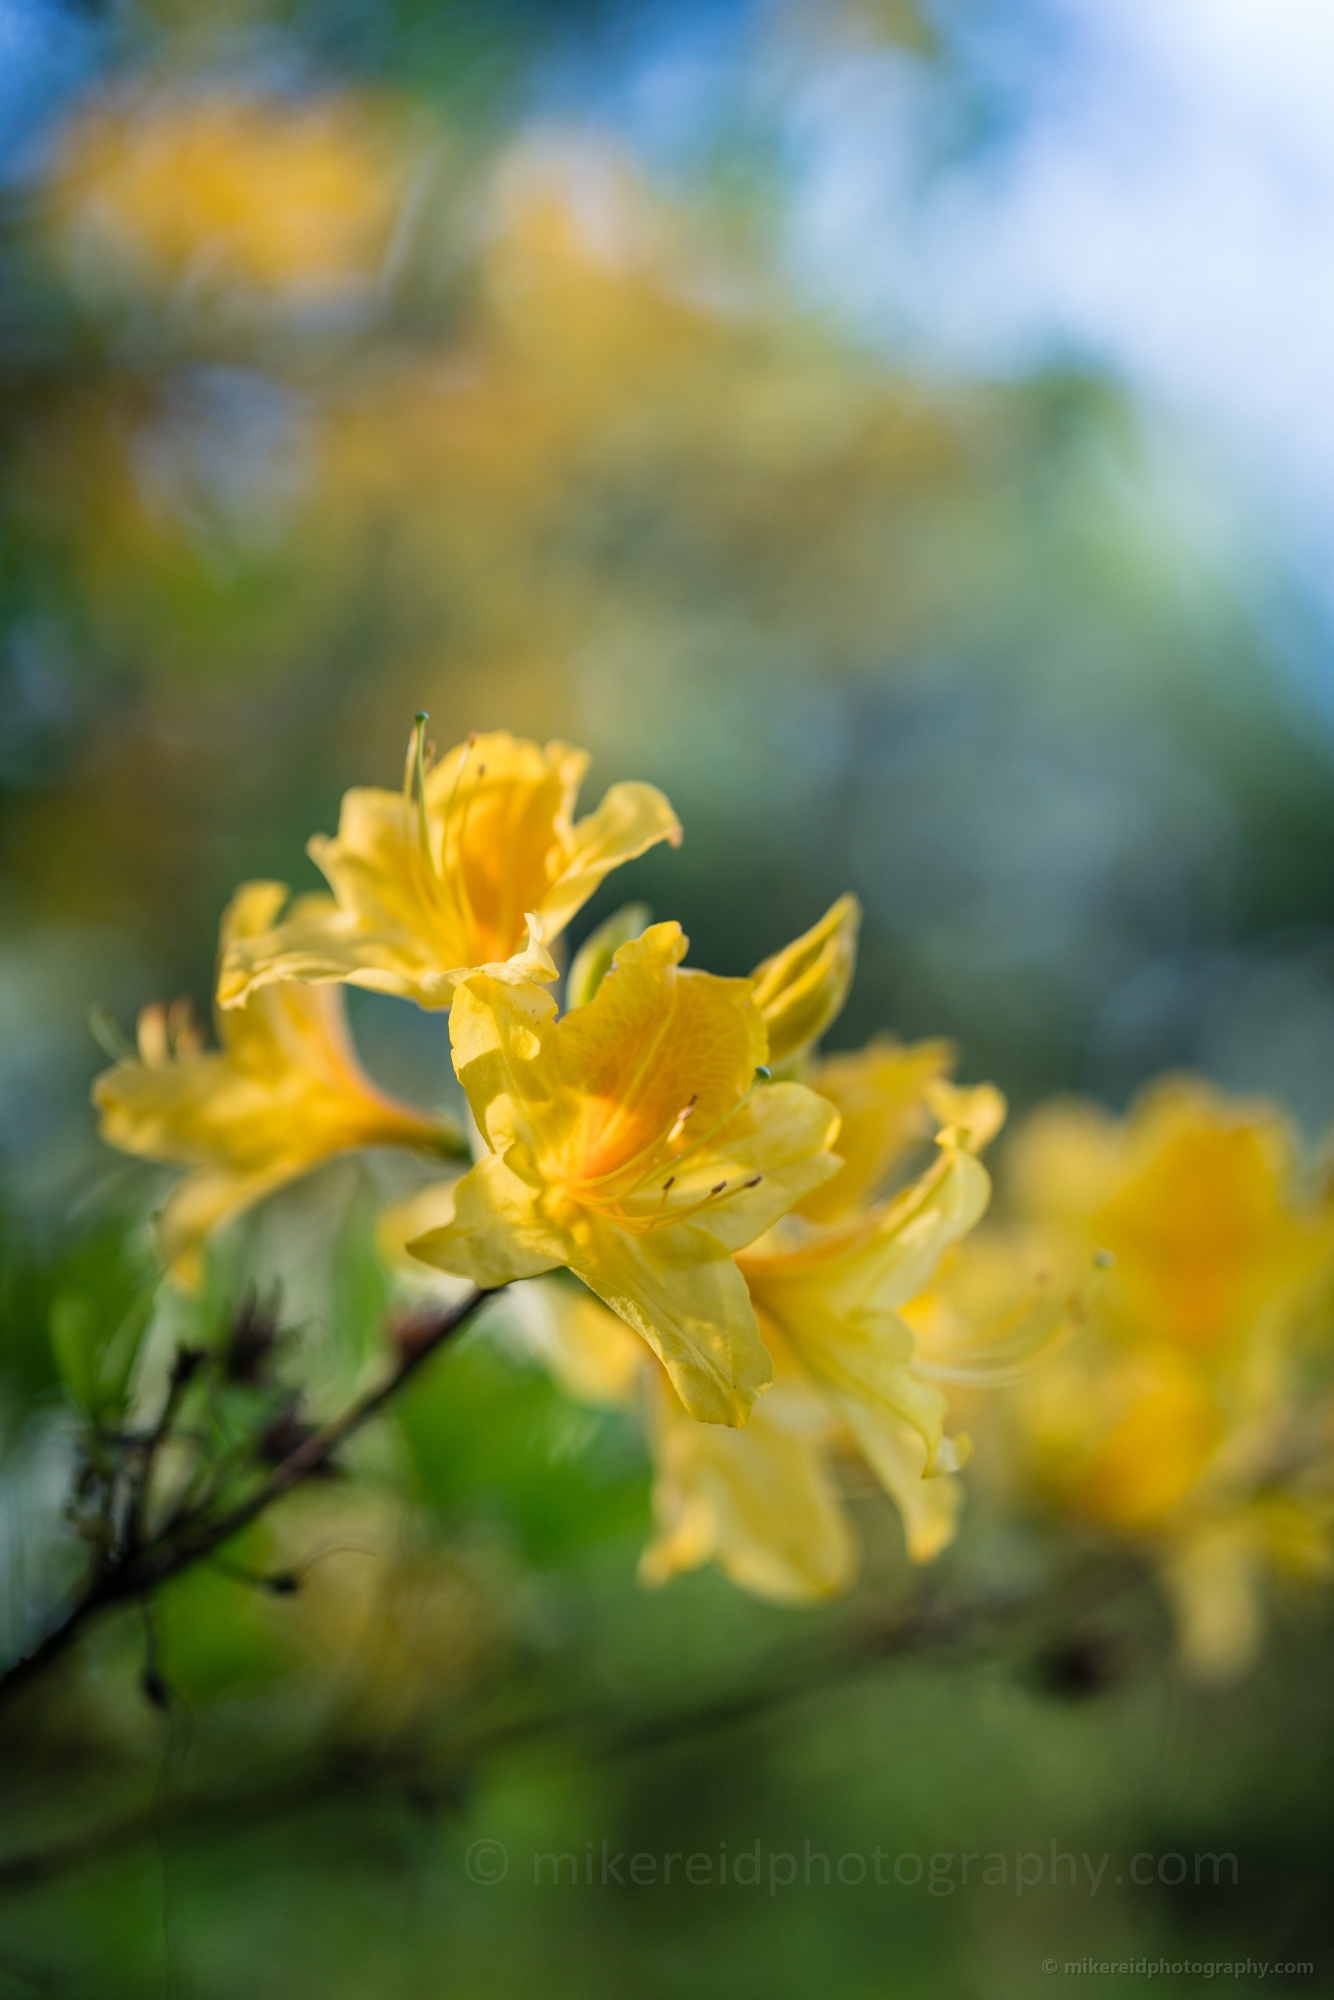 Rhododendron and Azaleas Photography Golden .jpg 